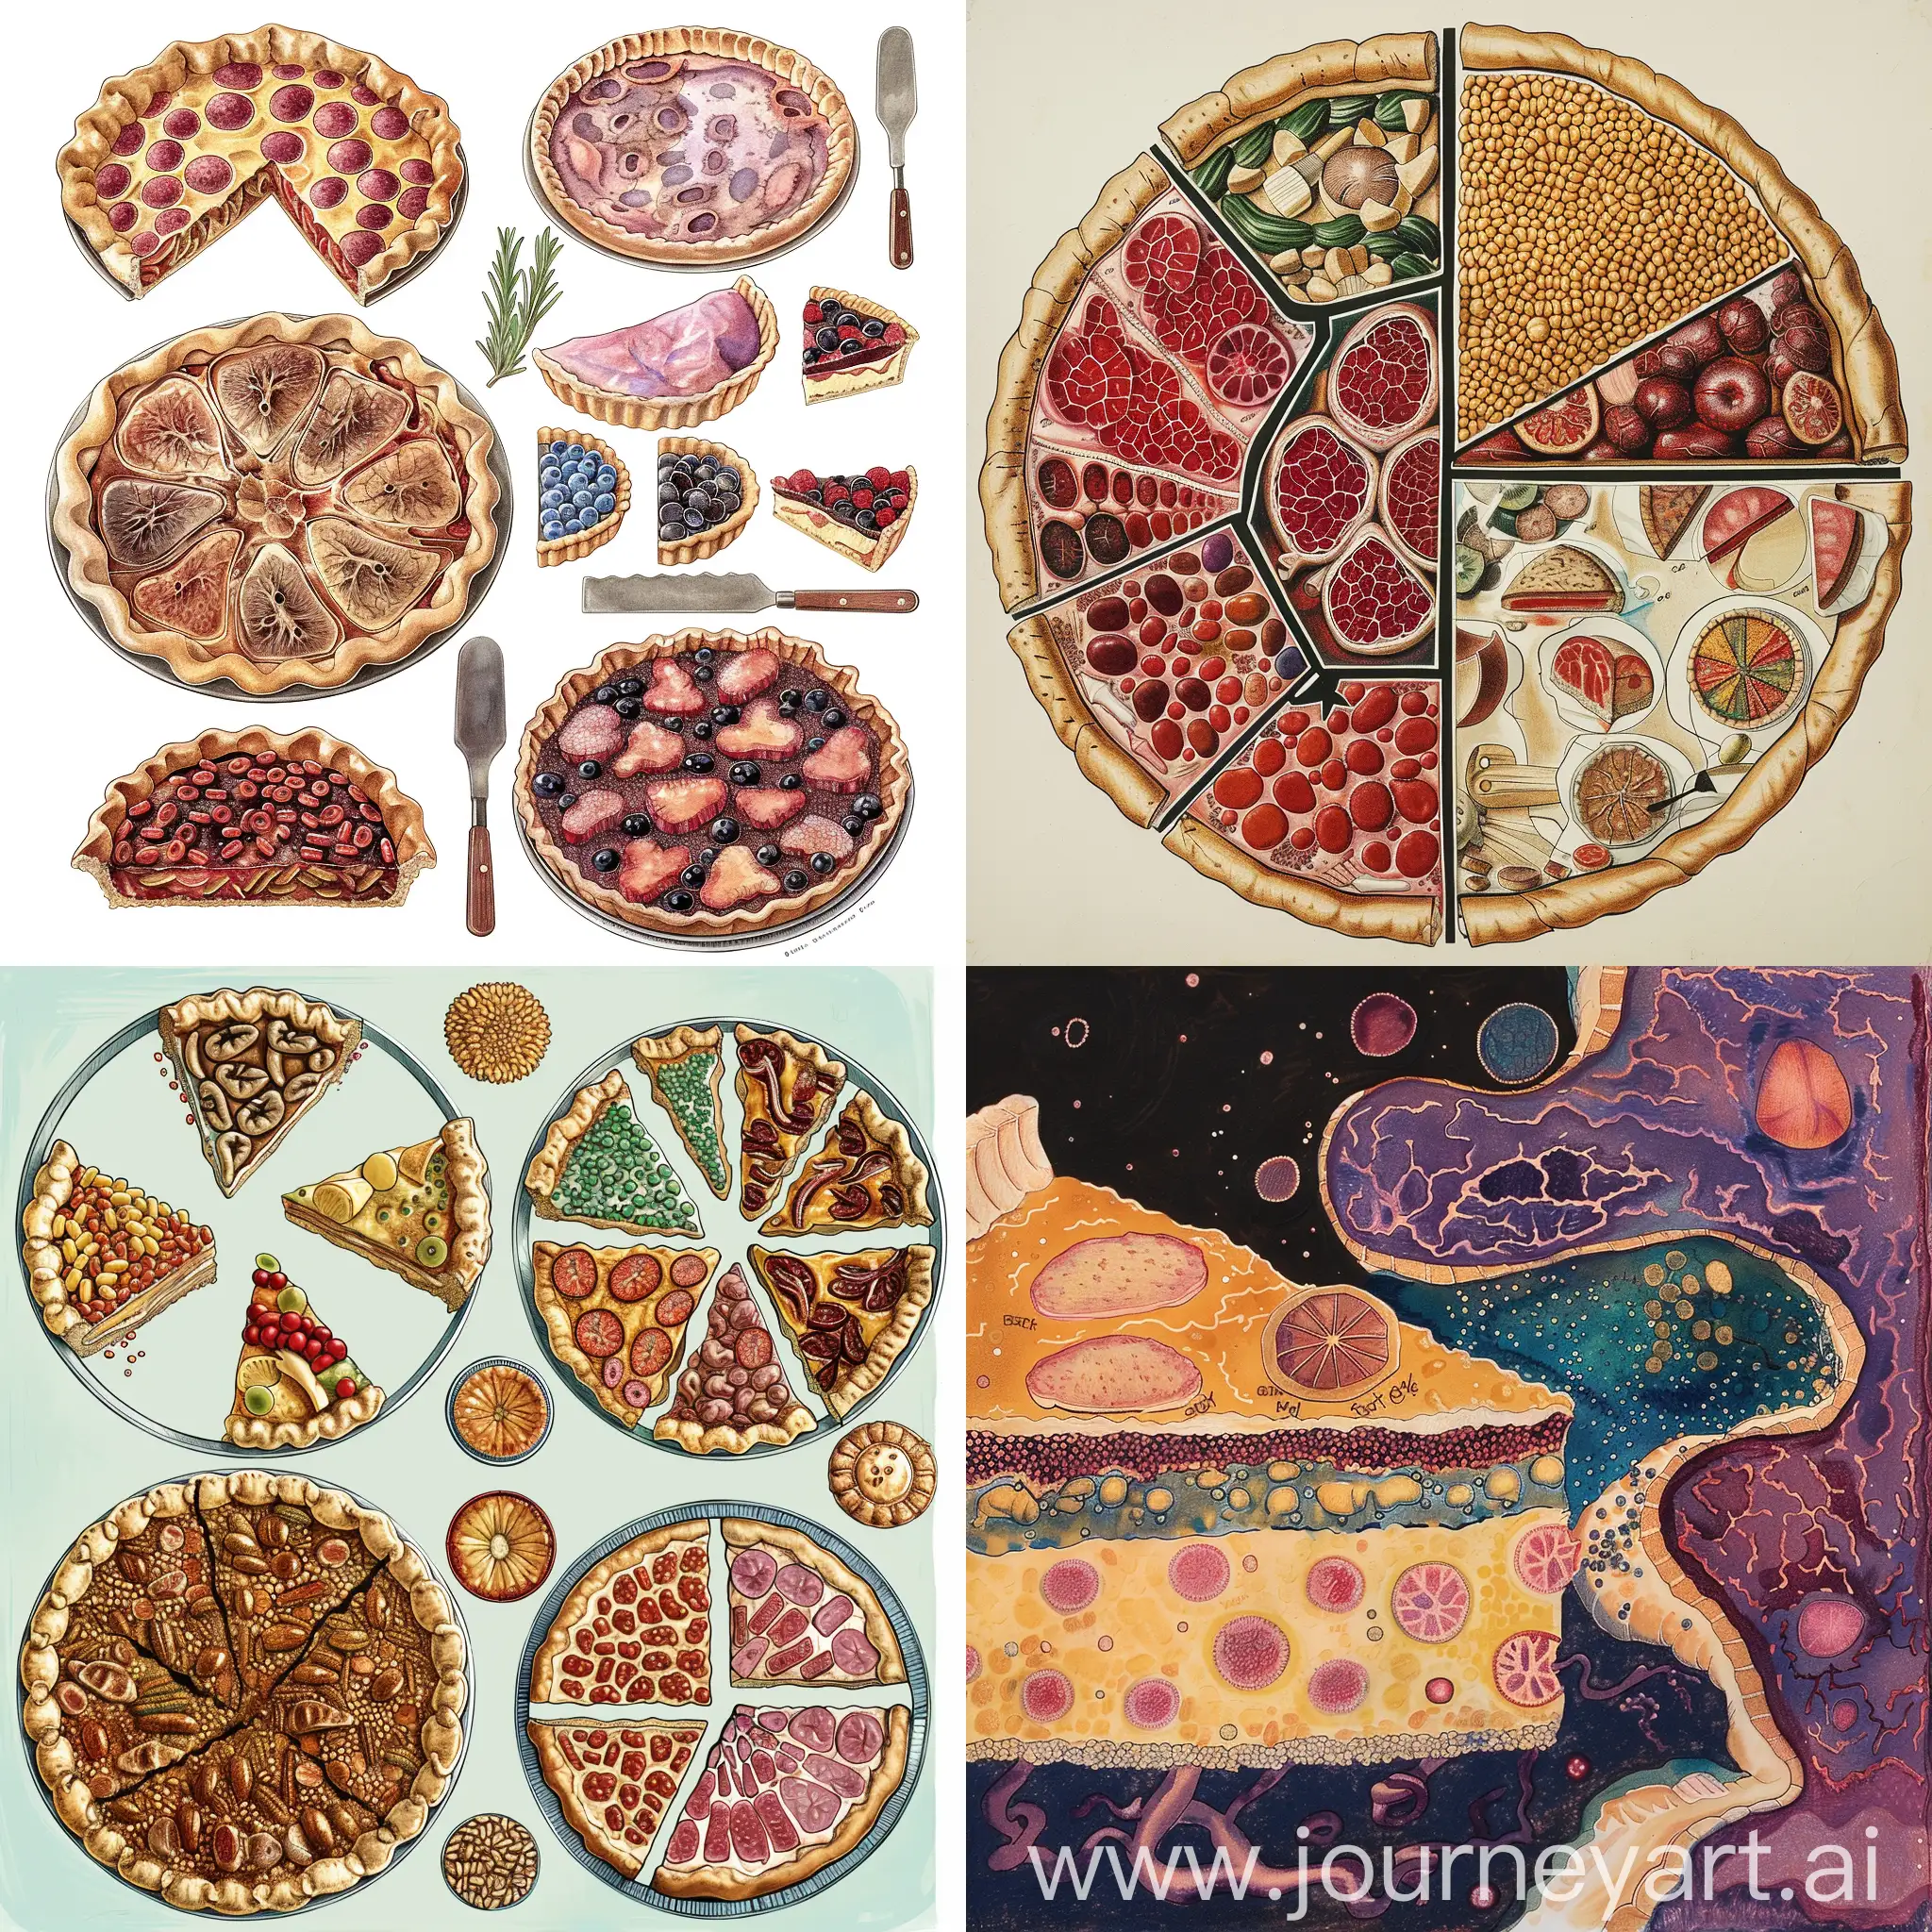 Histological-Sections-and-Pies-Scientific-Illustration-with-Culinary-Elements